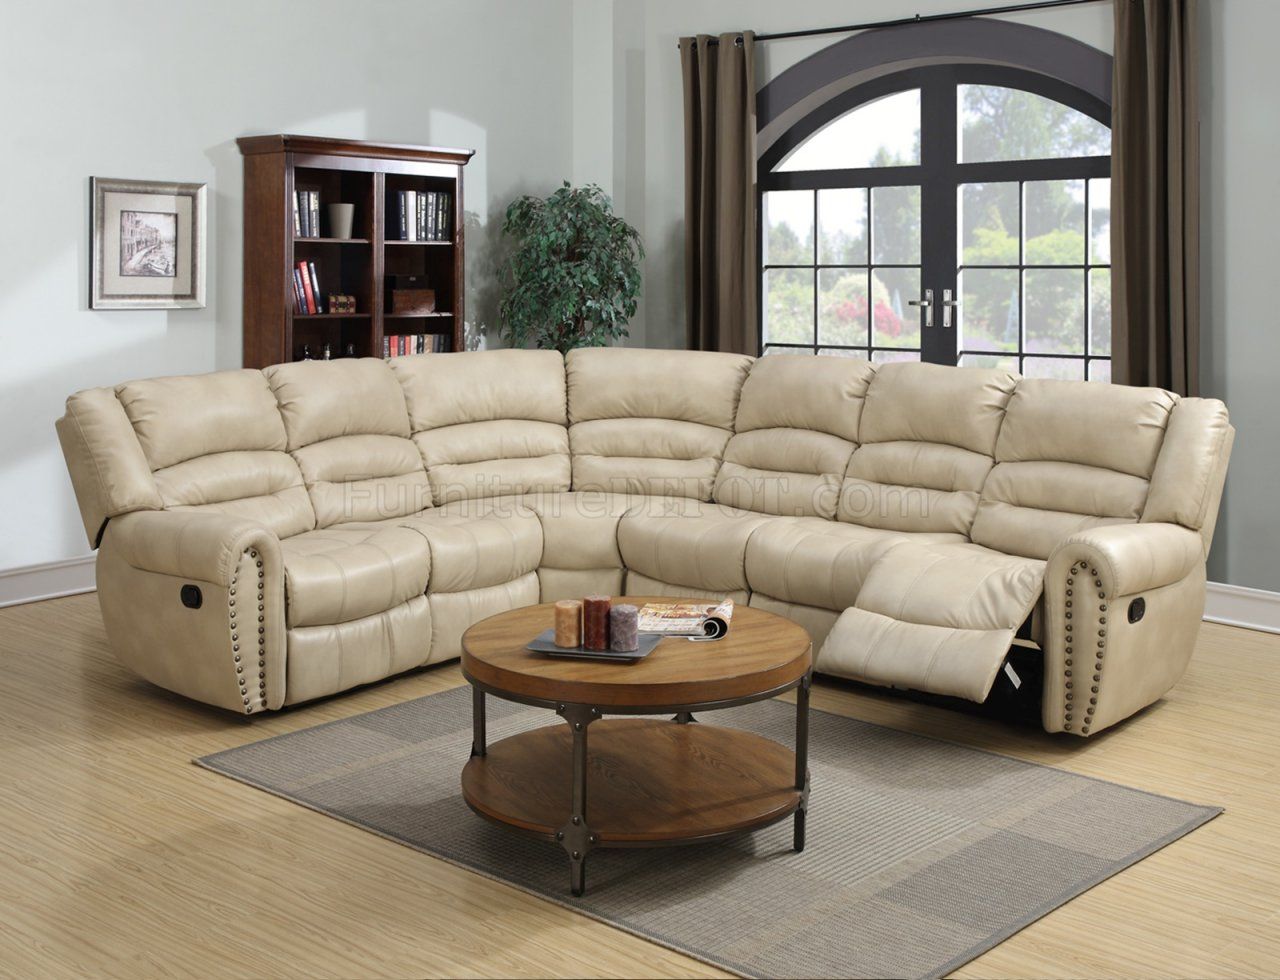 G687 Motion Sectional Sofa In Beige Bonded Leatherglory With U Shaped Couches In Beige (View 18 of 20)